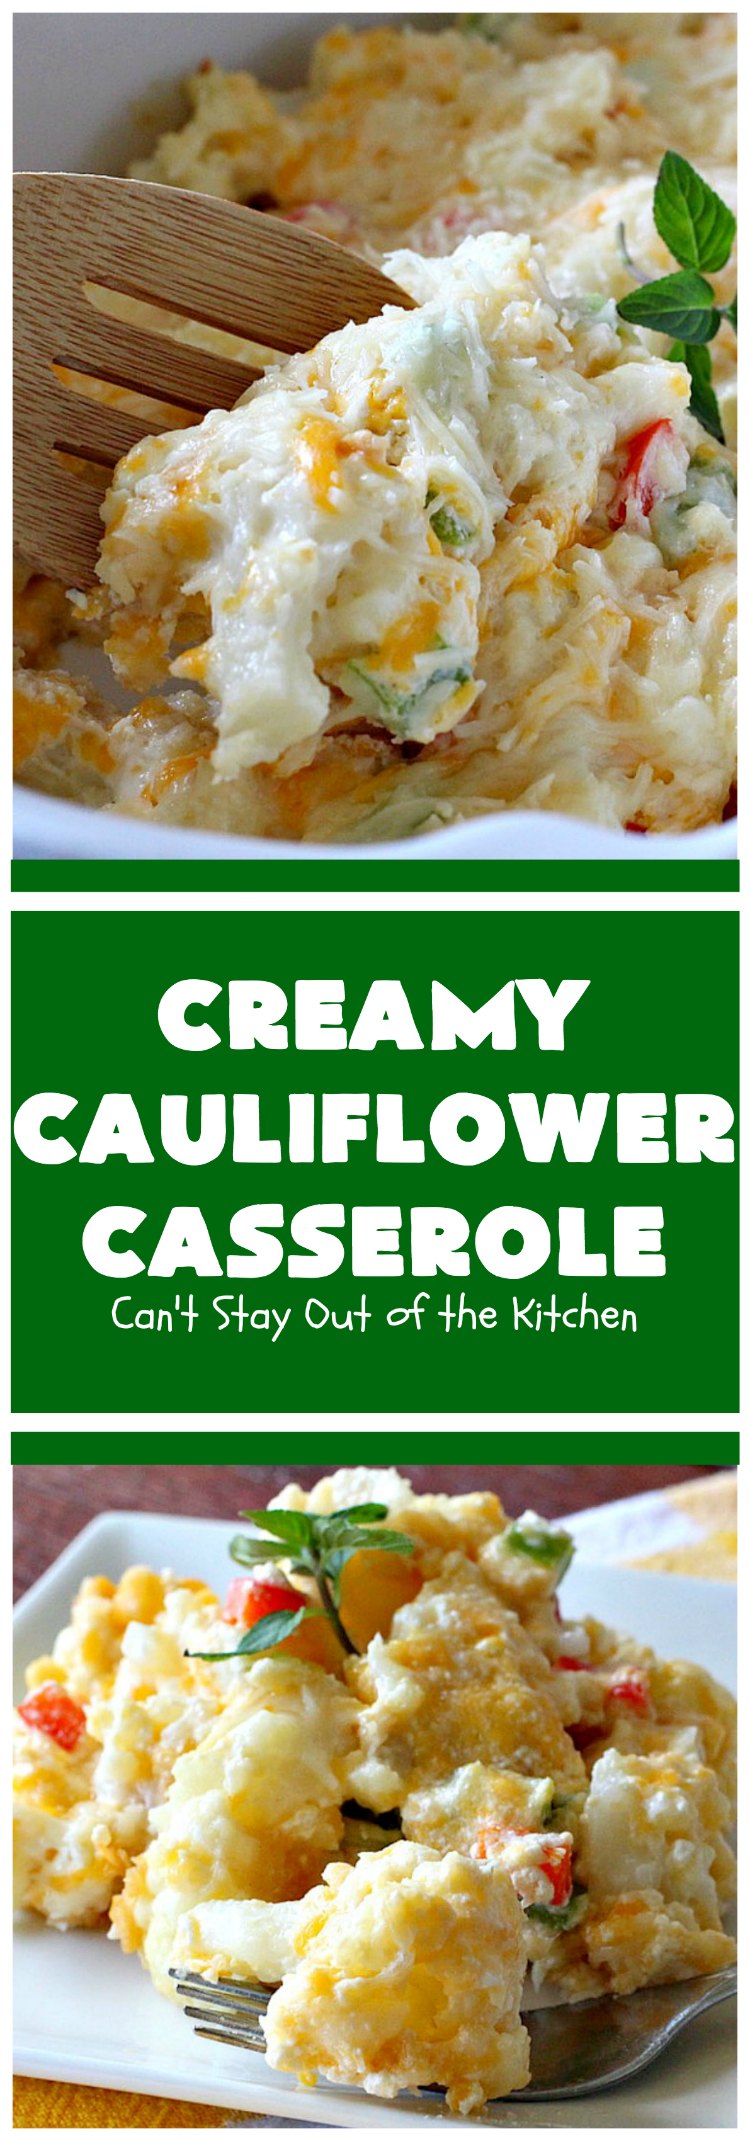 Creamy Cauliflower Casserole | Can't Stay Out of the Kitchen